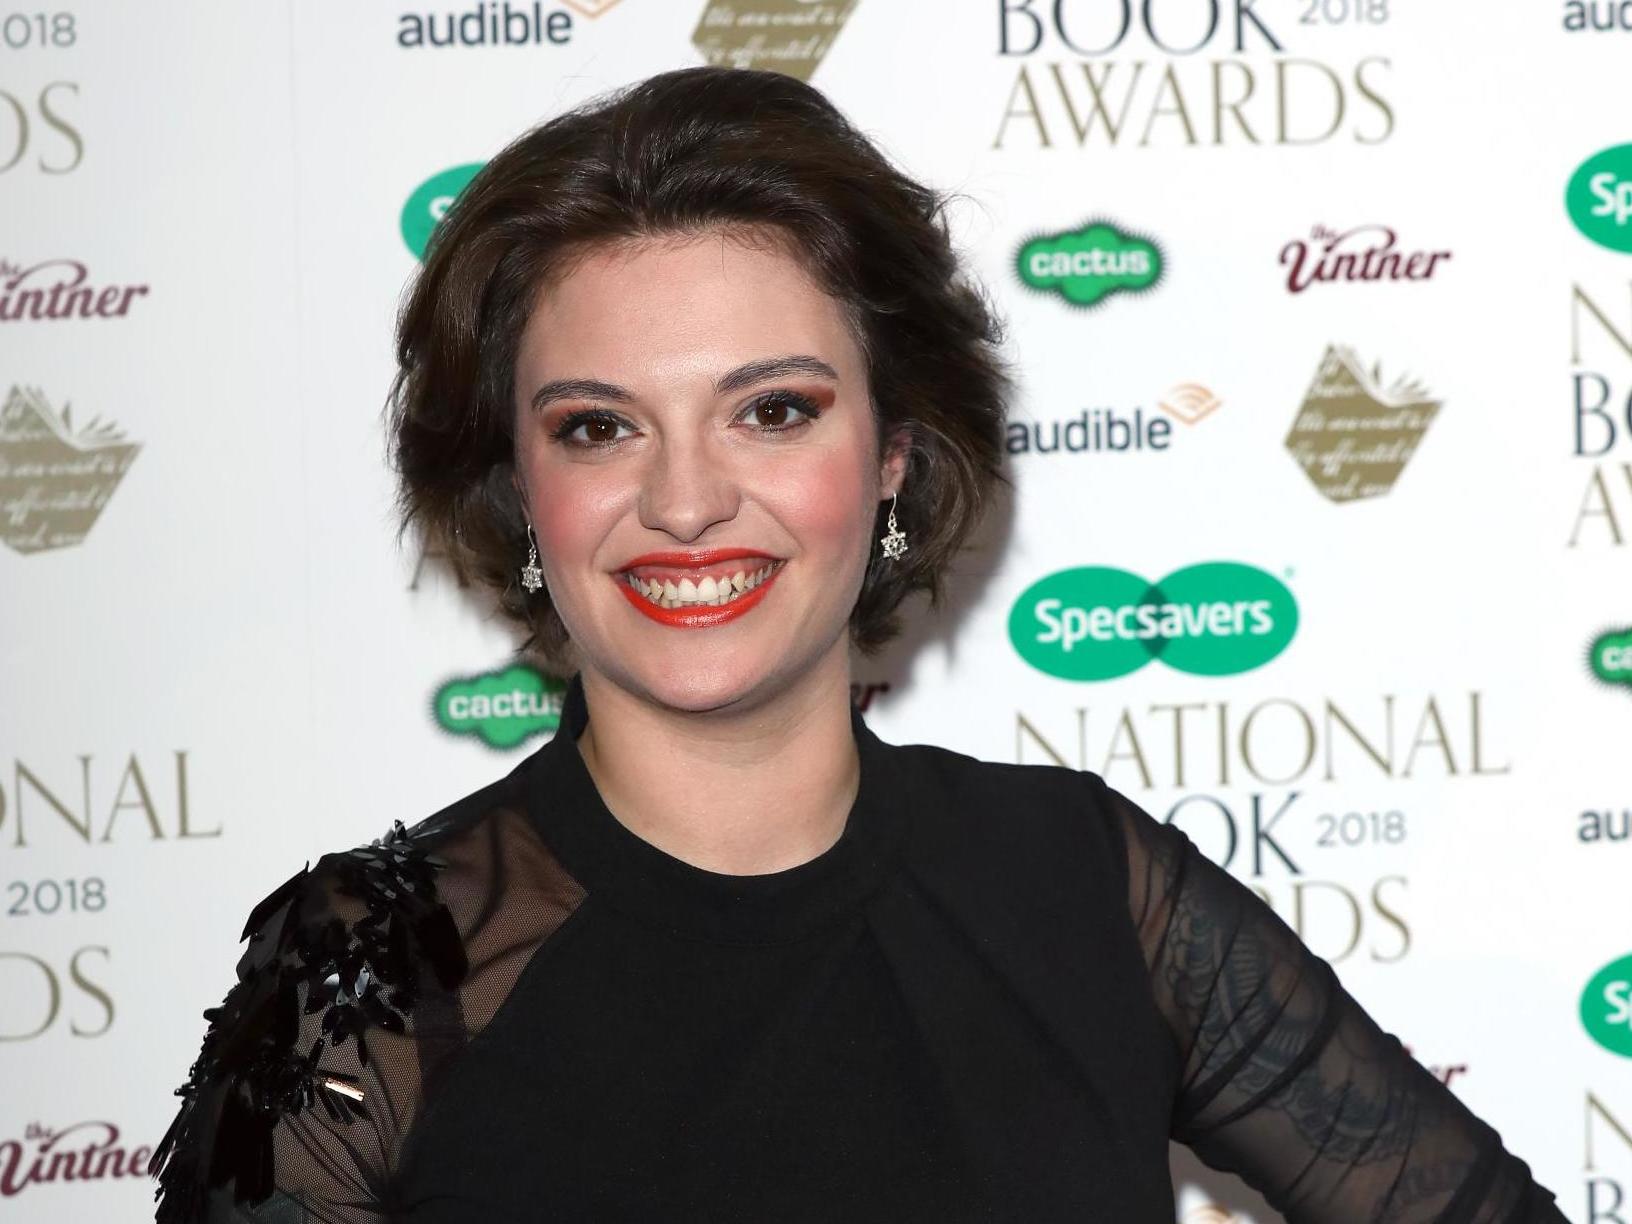 Jack Monroe has said she lost thousands in the scam